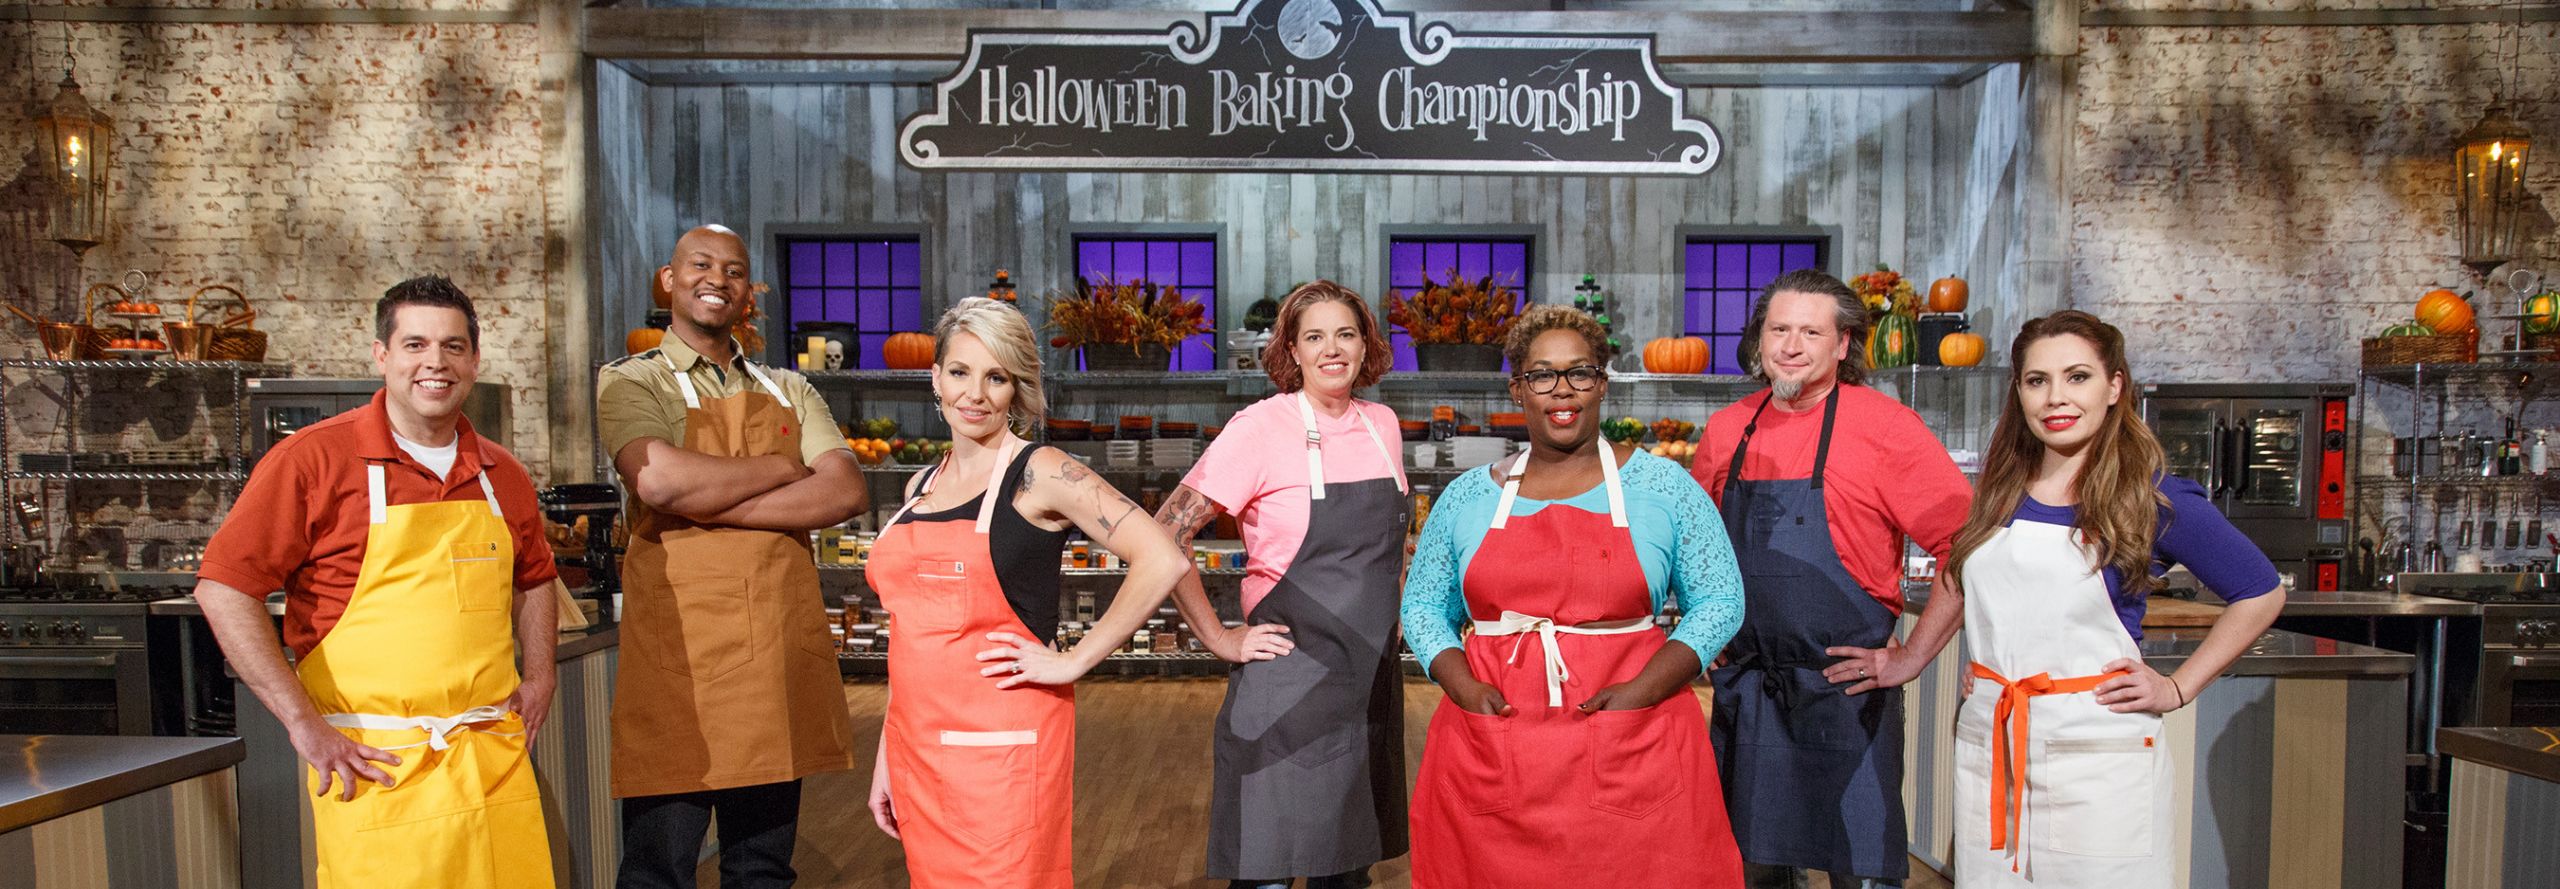 Food Network Halloween Baking Championship
 SPOOKY SWEETS AND TERRIFYING TREATS ABOUND ON THE RETURN